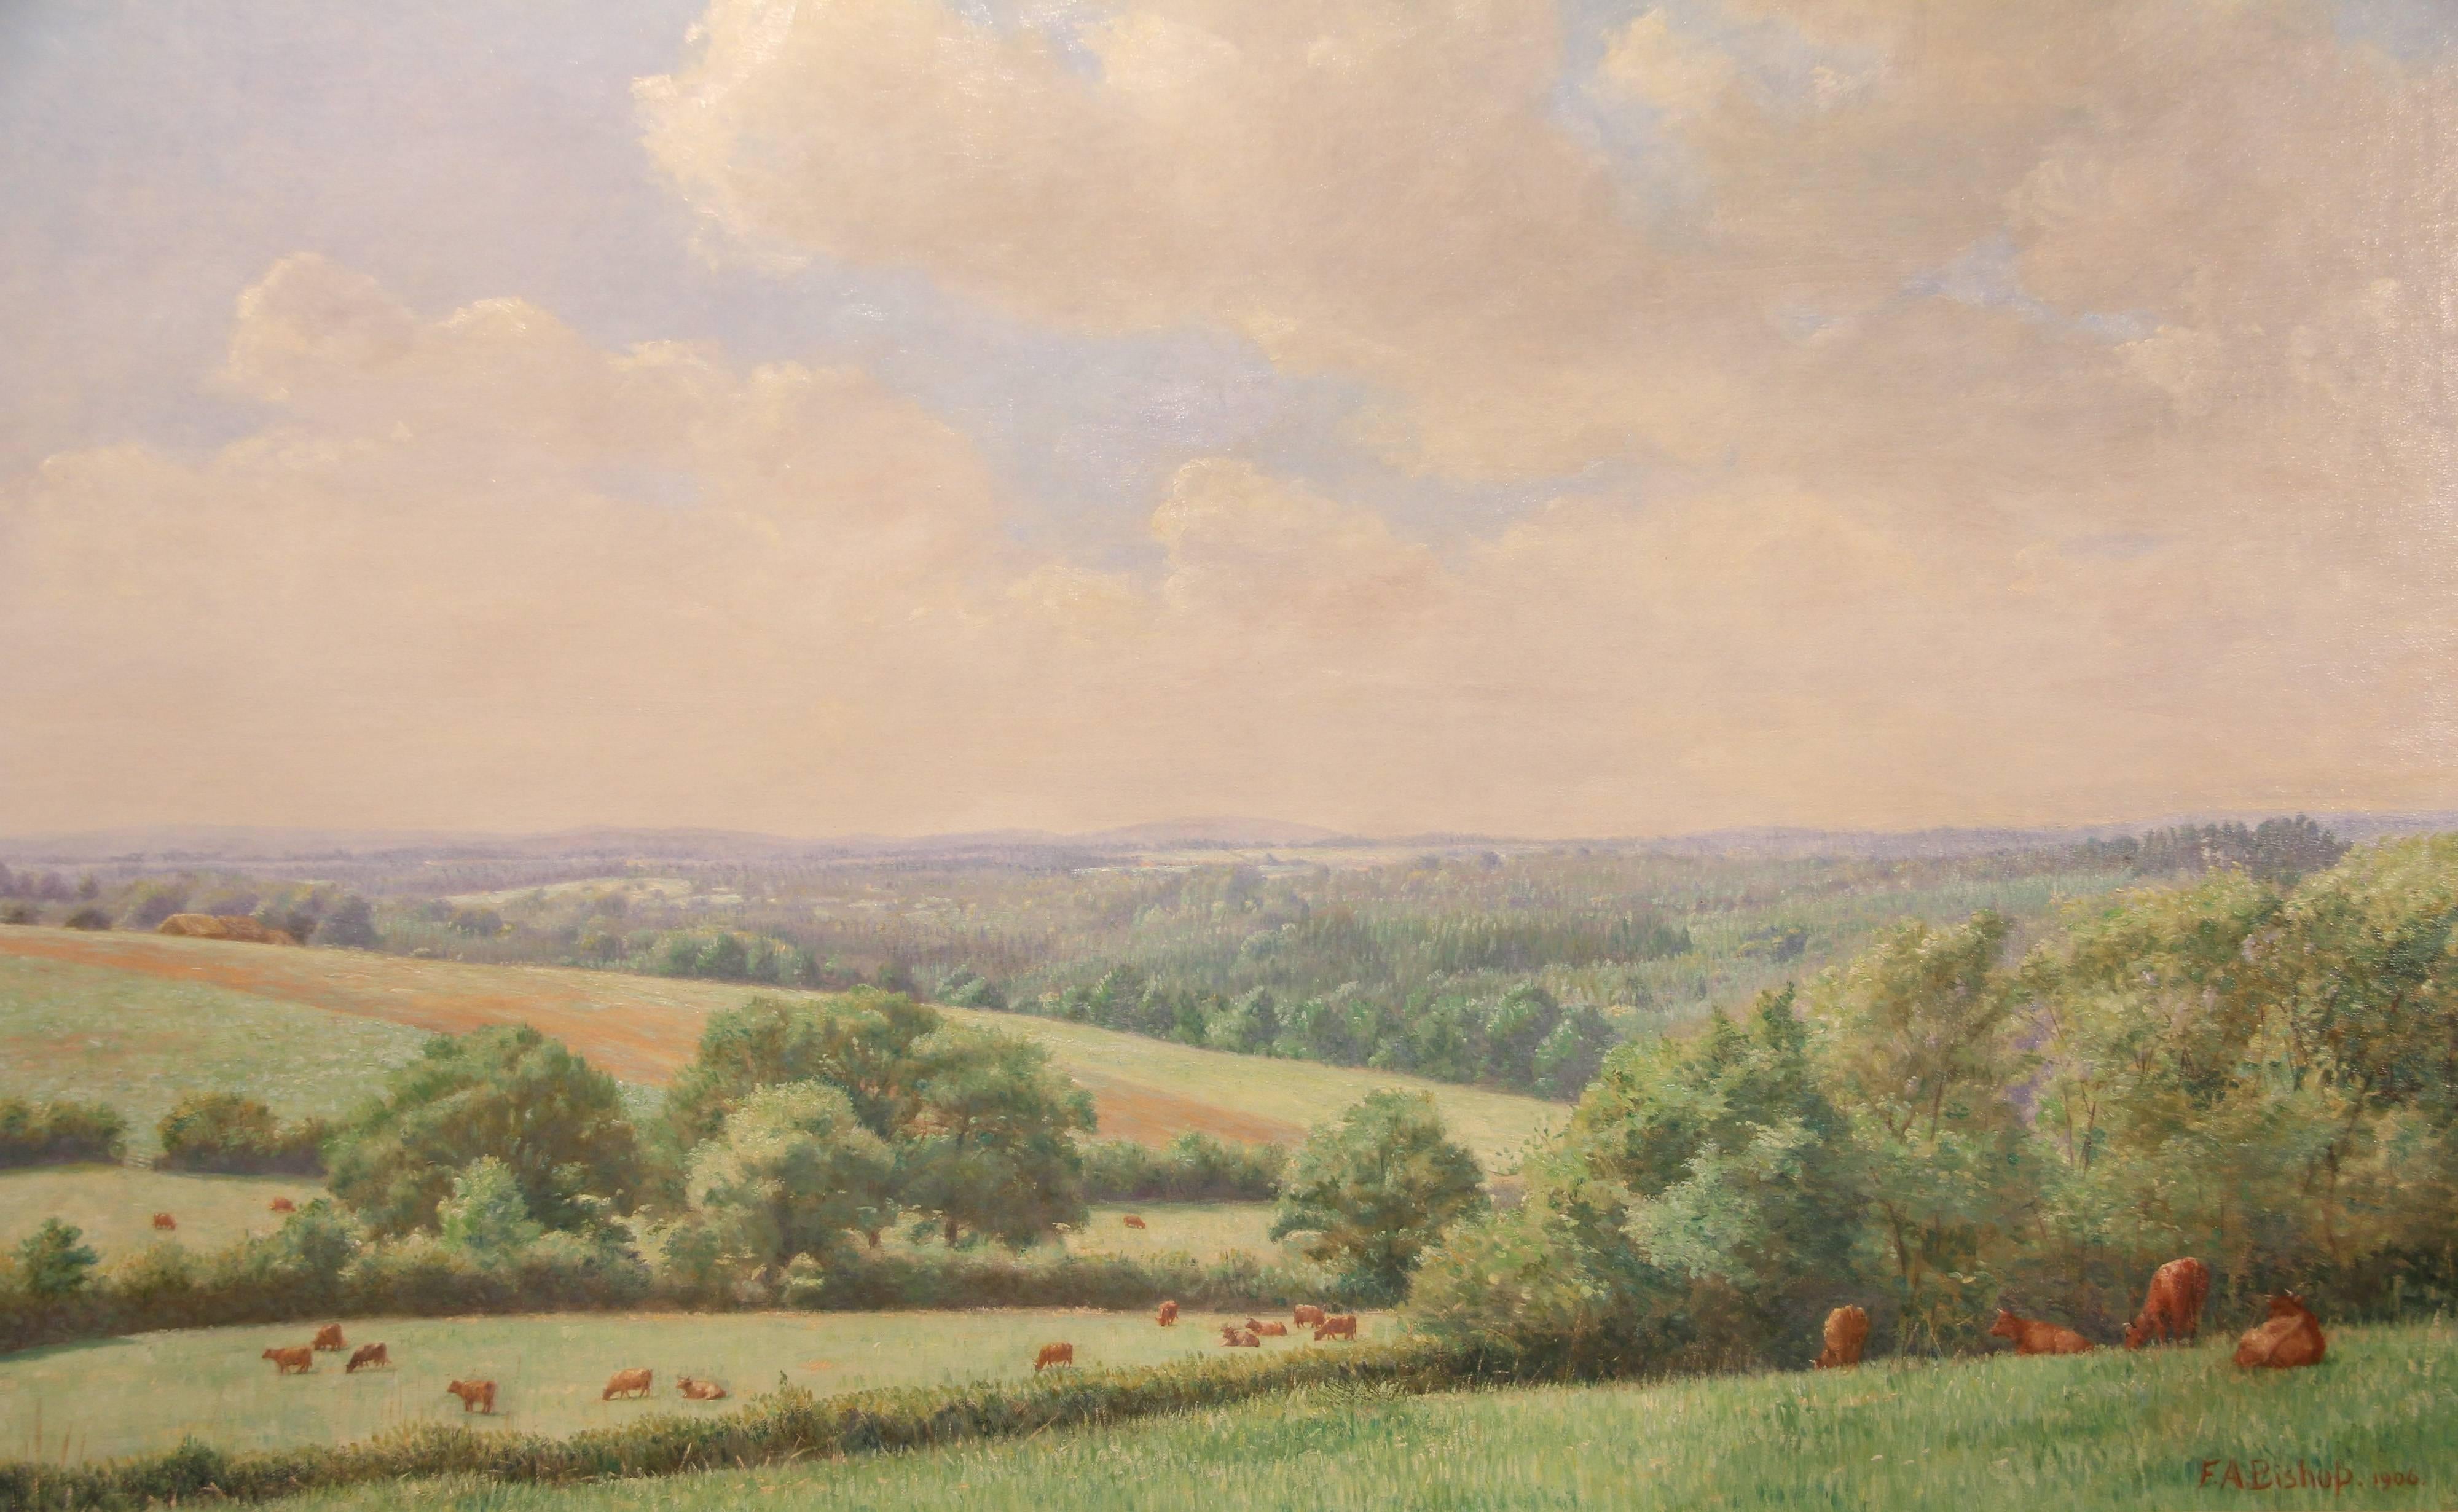 Home Countries landscape by Frederick A.Bishop, signed 1906. 1905-39 London landscape painter who exhibited R.A. Institute and Liverpool. Oil on canvas, 24x36".

All of the items that we advertise for sale have been as accurately described as